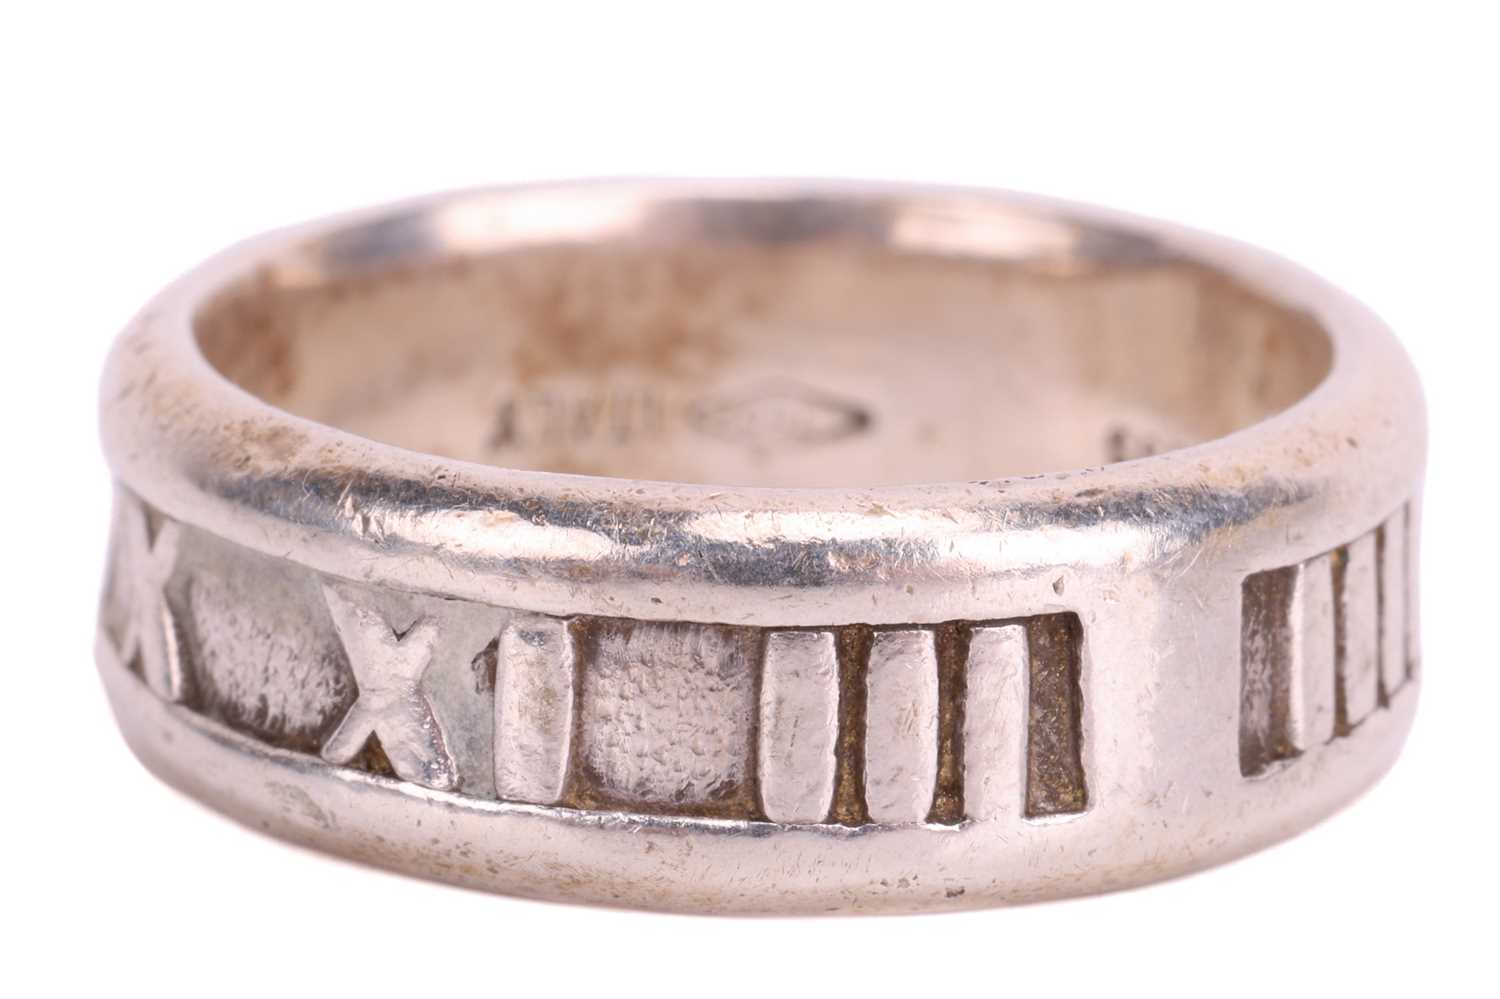 Tiffany &amp; Co. - Atlas ring in 18ct white gold, engraved with Roman numerals on a thick band, sig